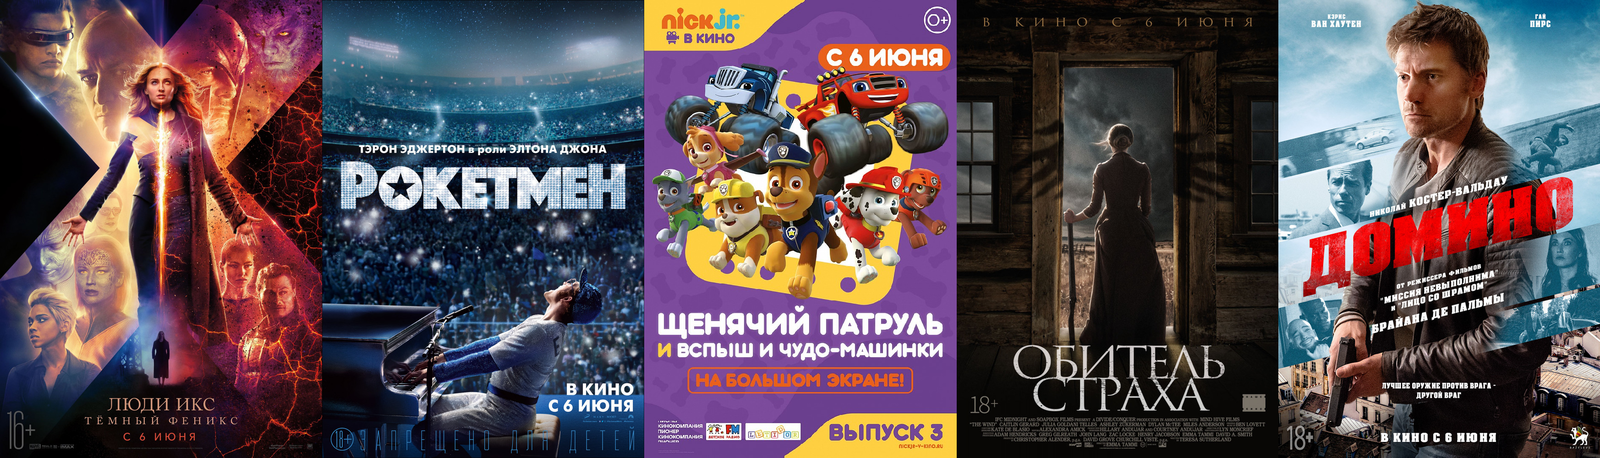 Russian box office receipts and distribution of screenings over the past weekend (June 6 - 9) - Movies, Box office fees, Film distribution, X-Men: Dark Phoenix, Rocketman